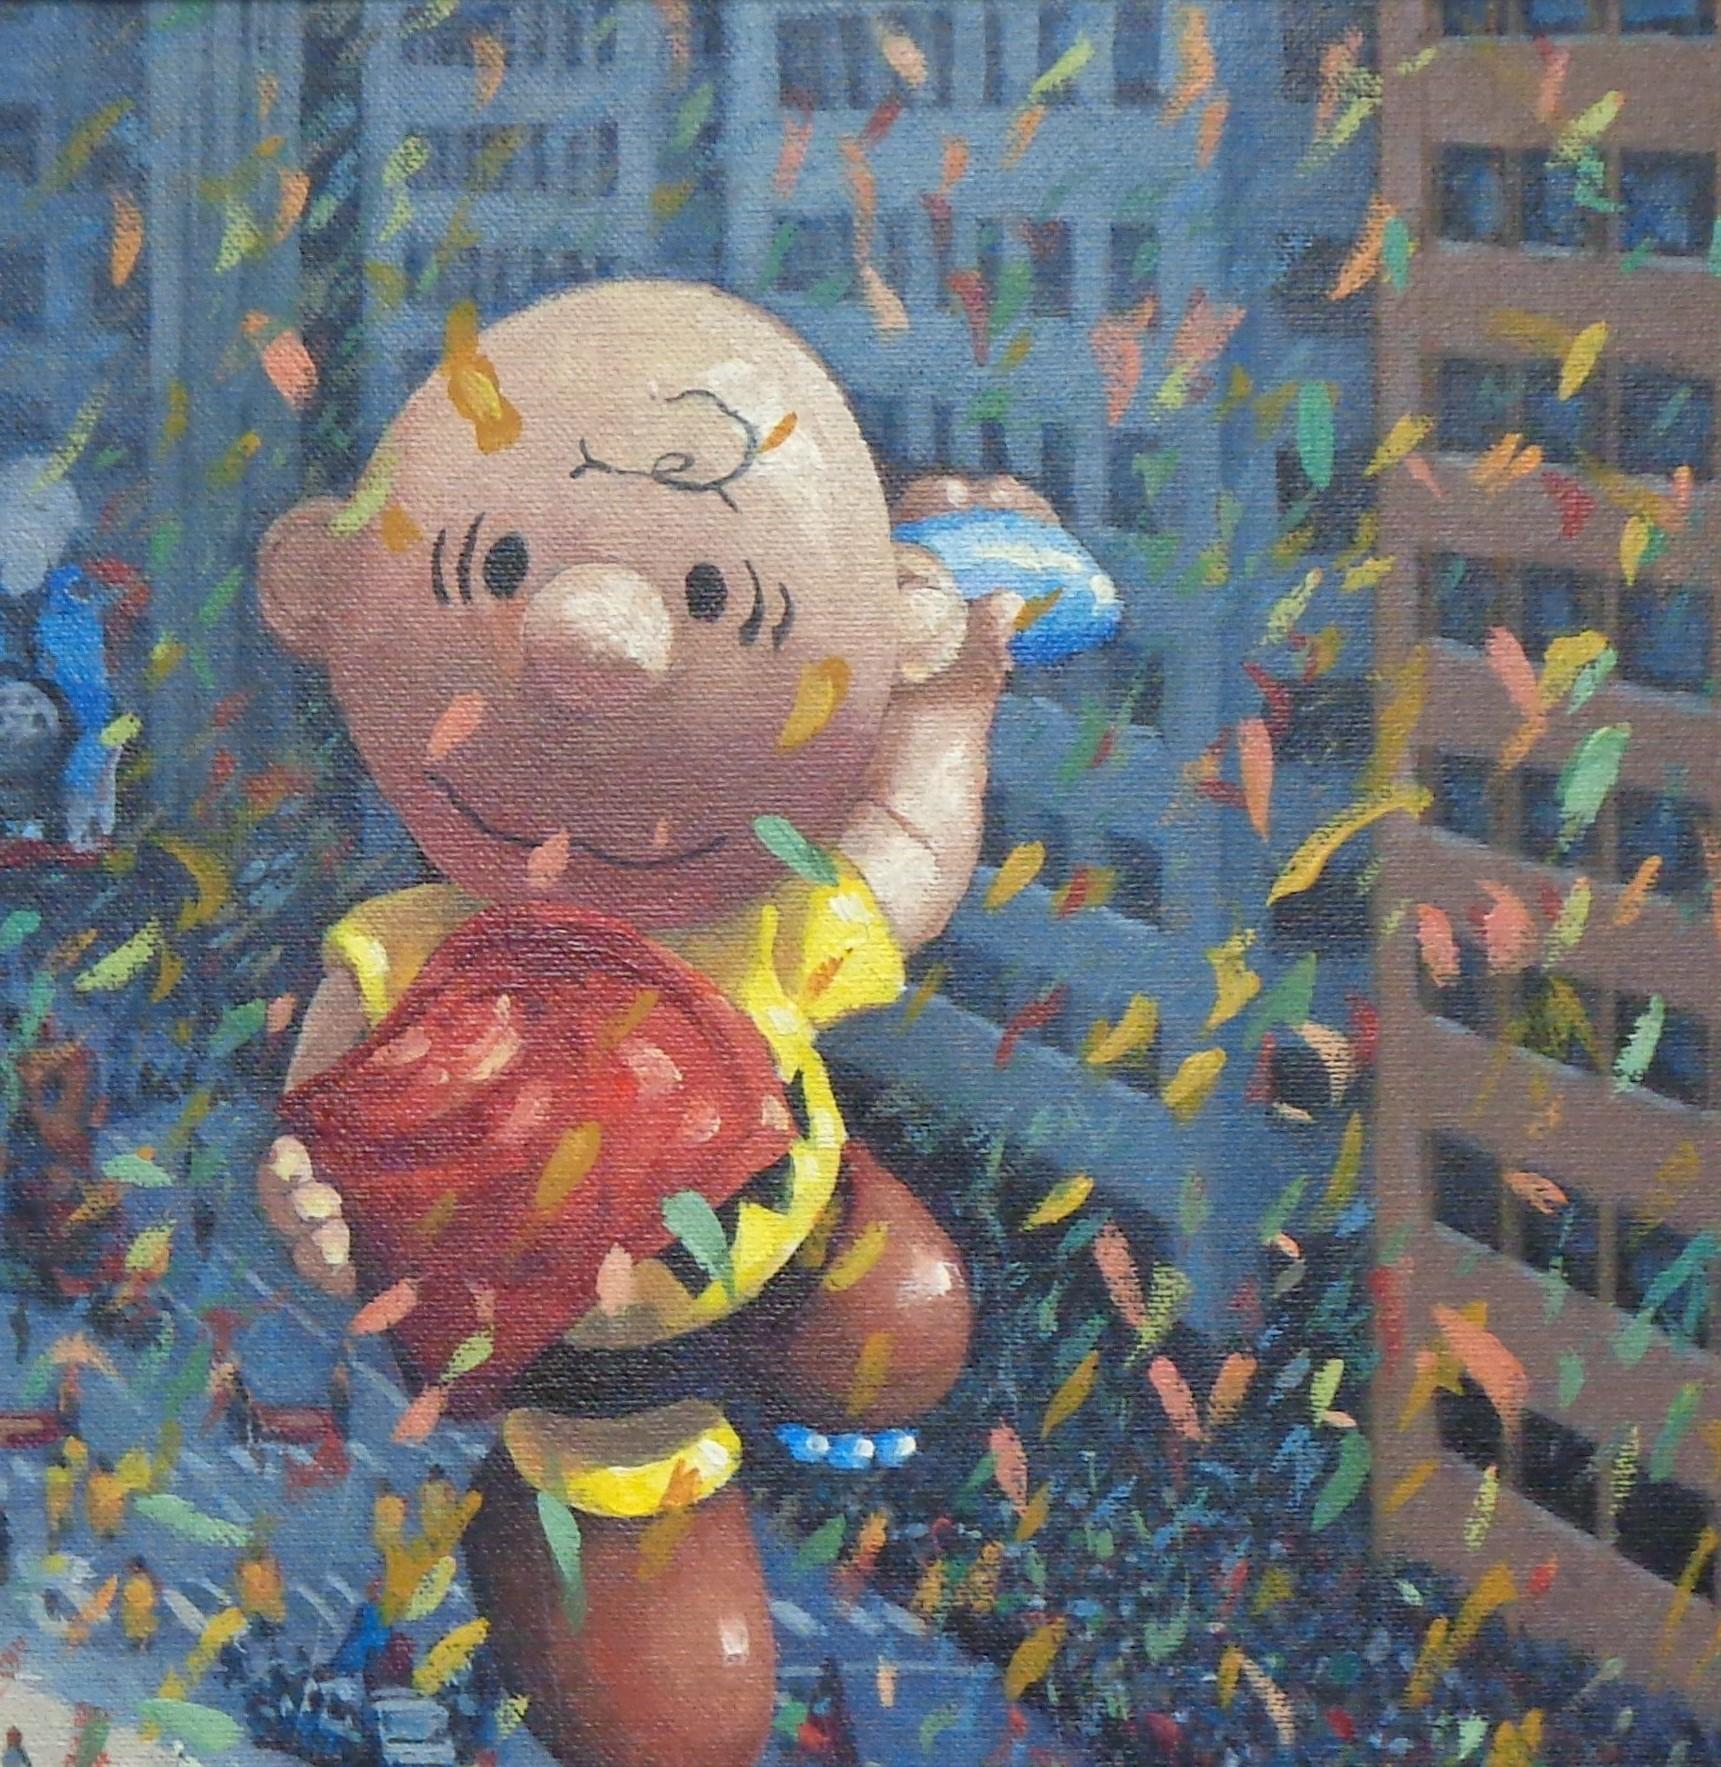   NYC Landscape Oil Painting Michael Budden Macy's Parade Series Charlie Brown For Sale 2